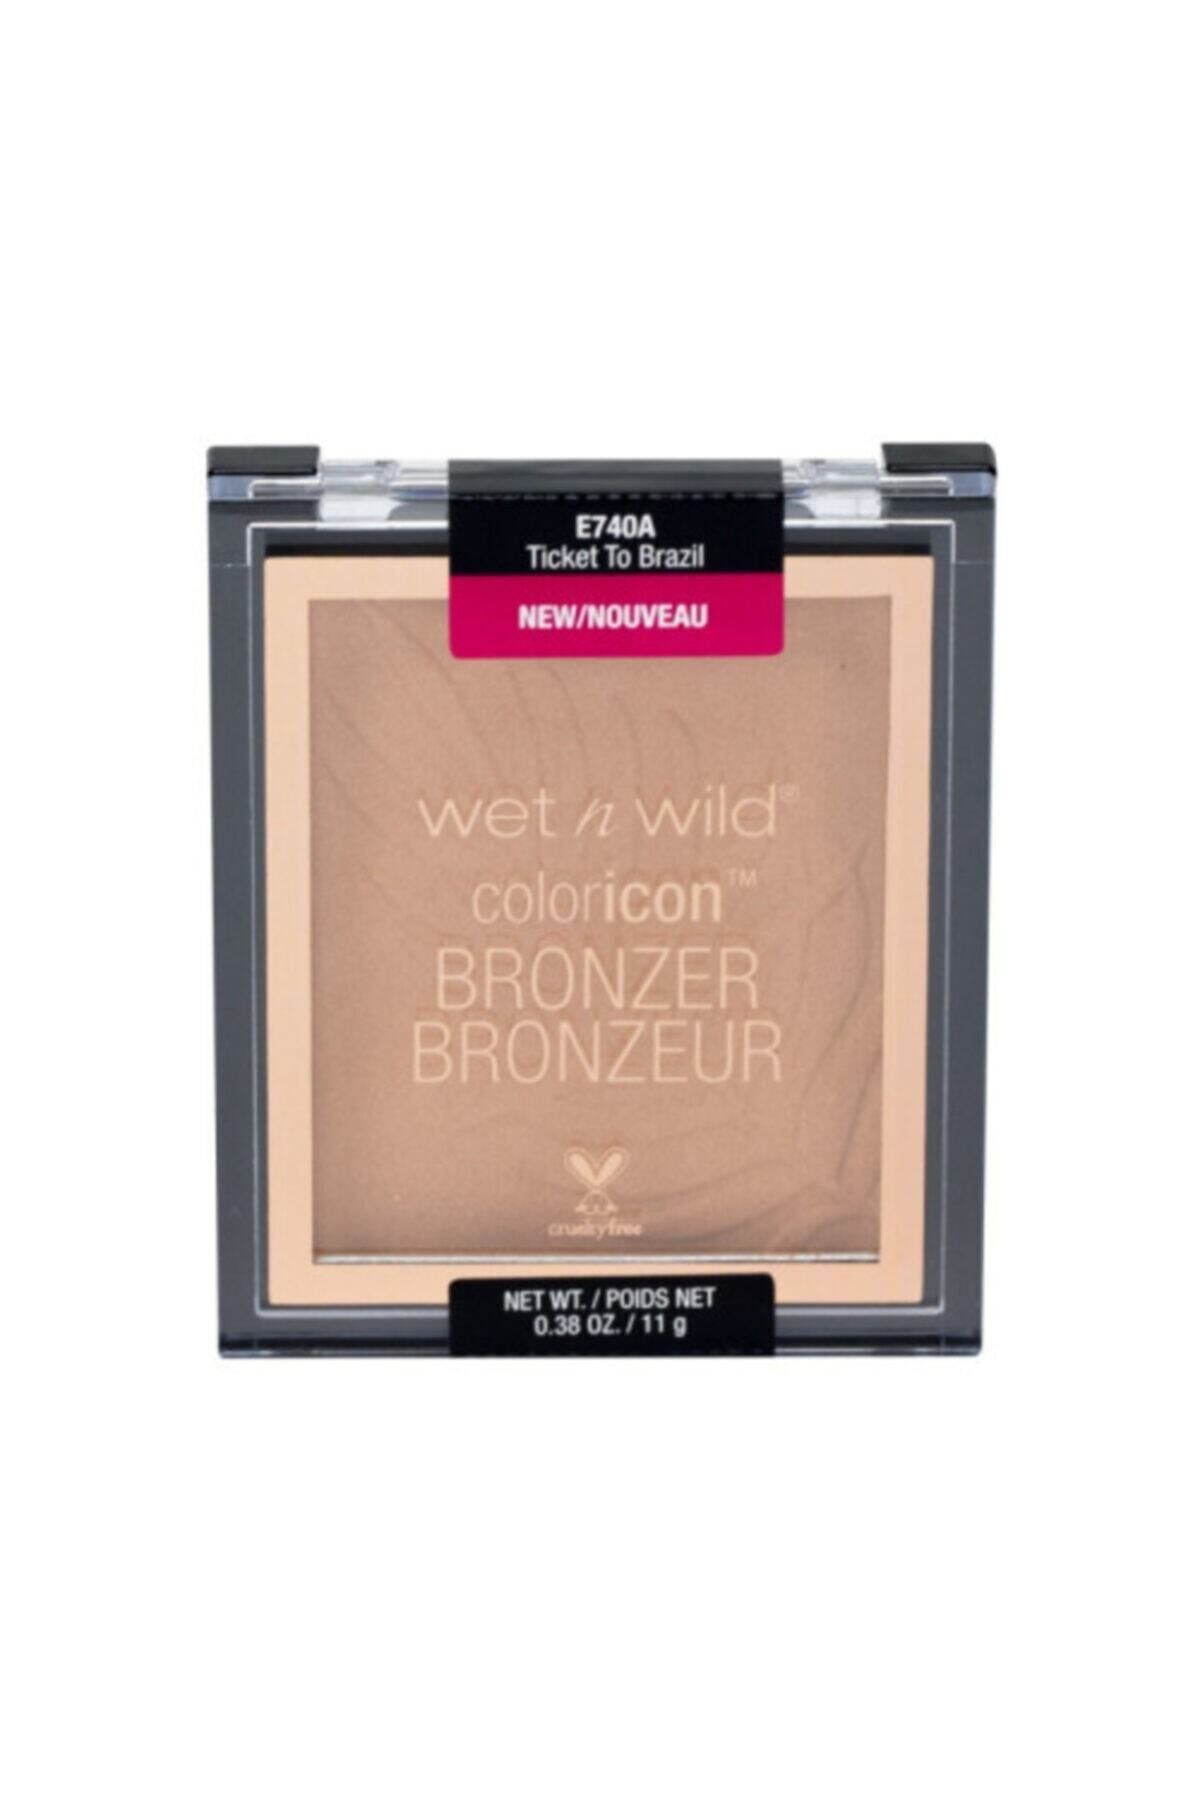 WET N WİLD Color Icon Bronzer Ticket To Brazil E740a -